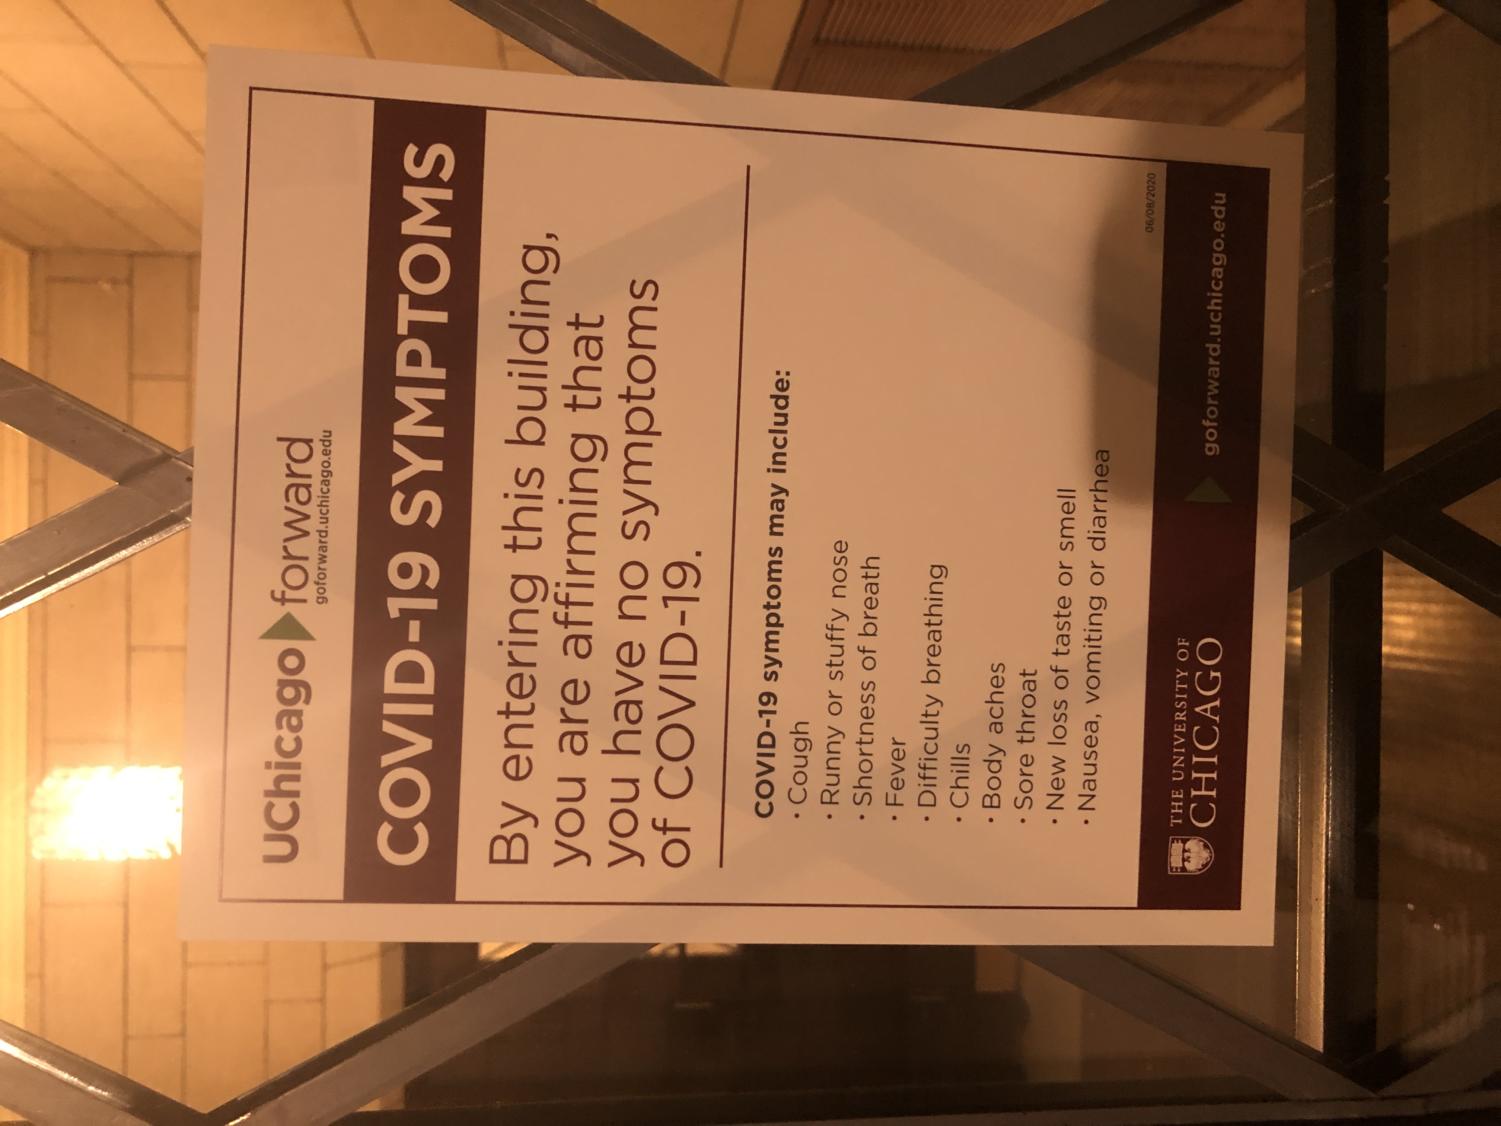 A UChicago-produced flyer on the door of the Social Science Research Building says that those entering are affirming they have no COVID-19 symptoms.